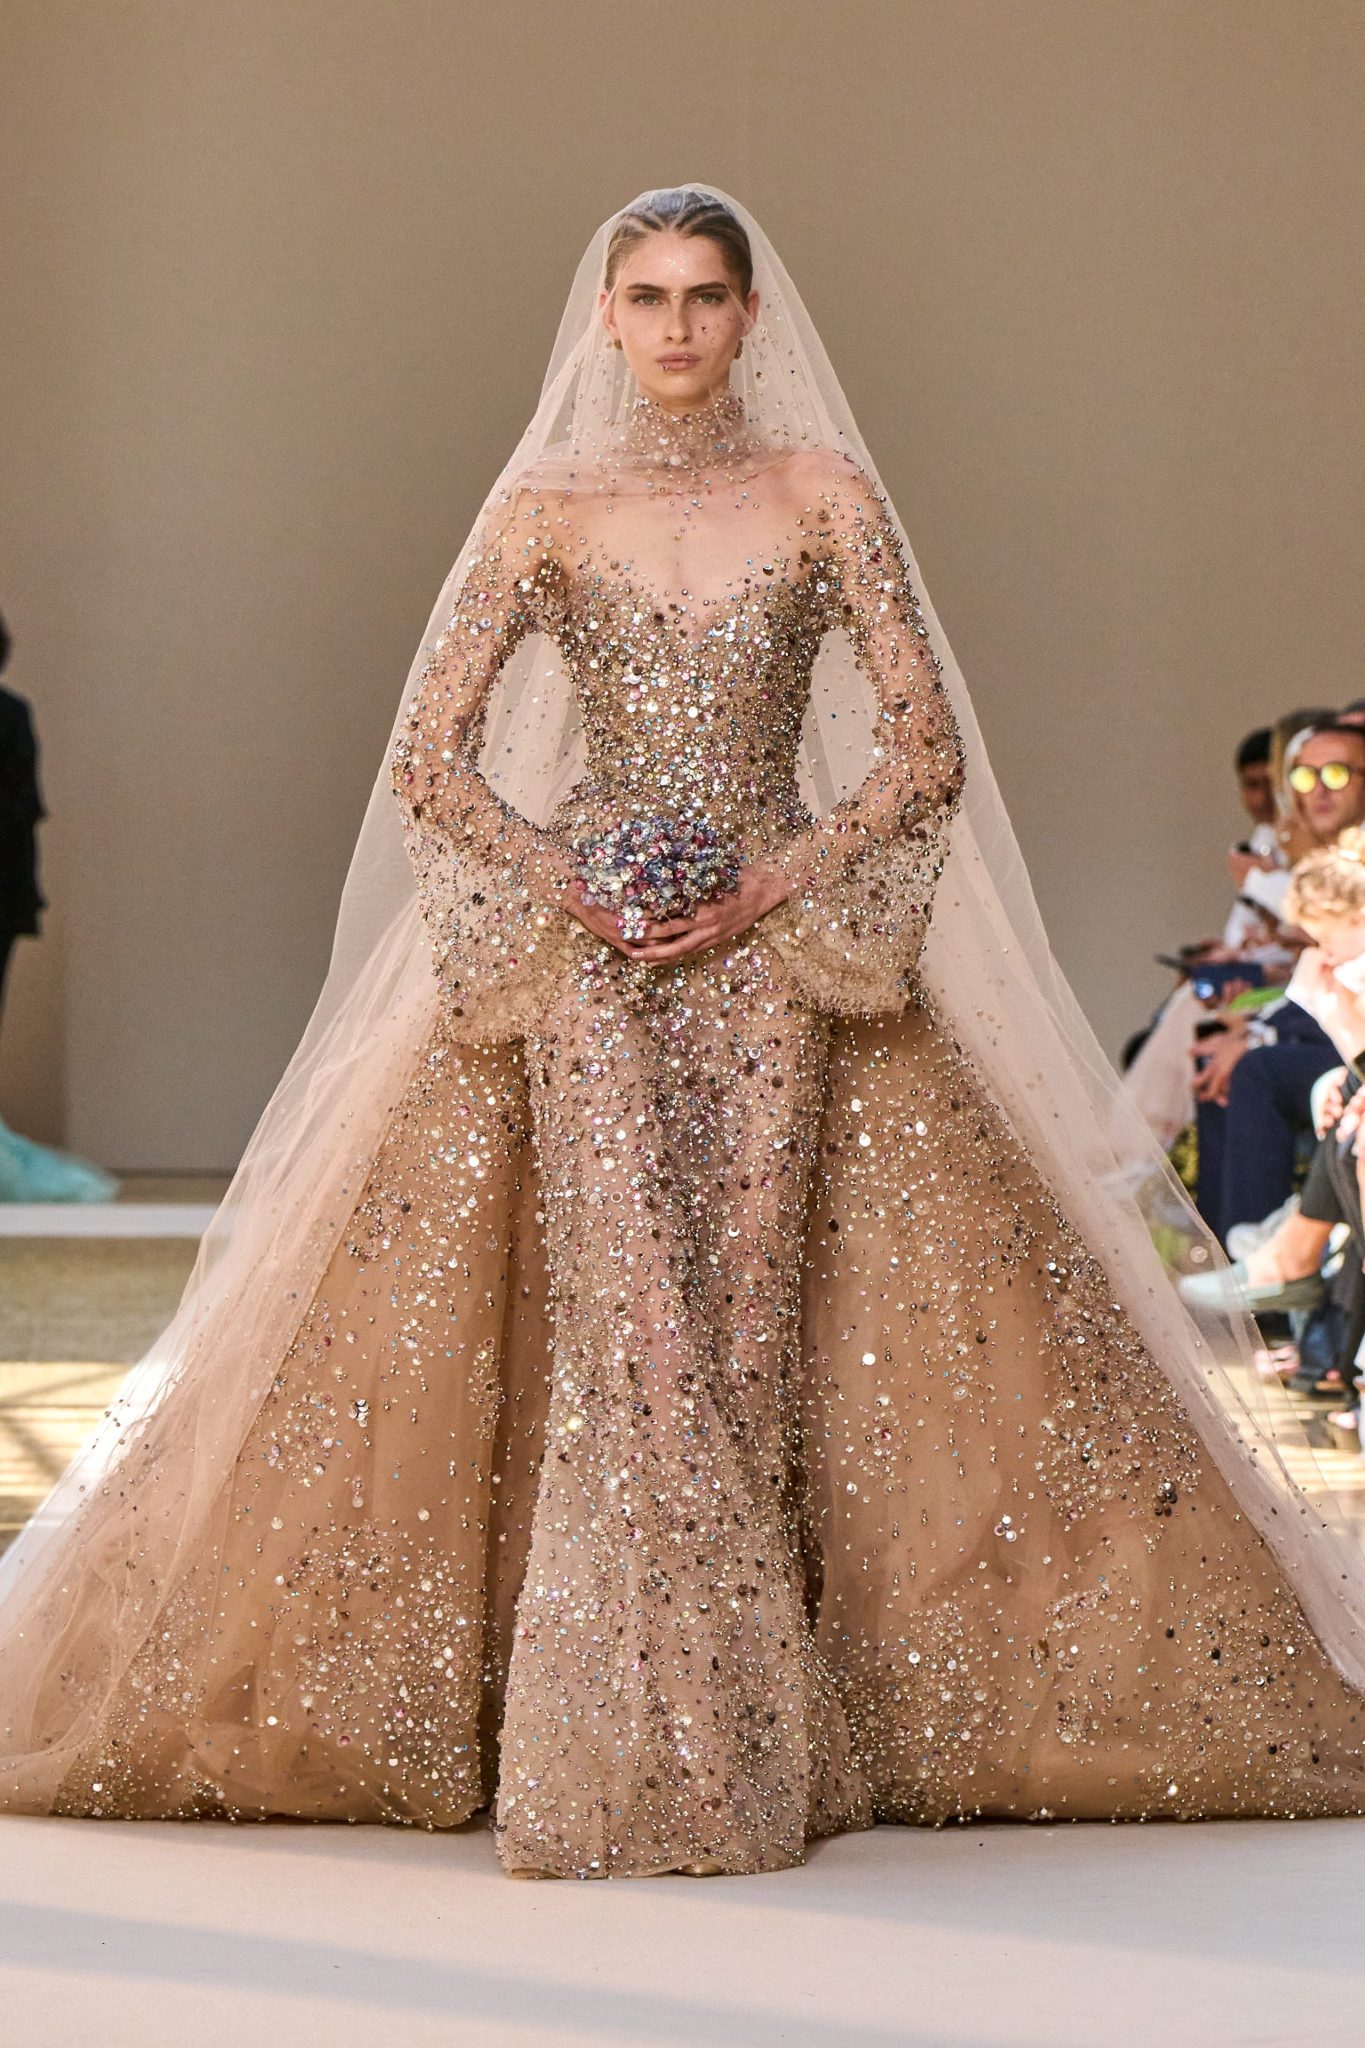 ELIE SAAB Presents Haute Couture FallWinter 2022/23 Collection